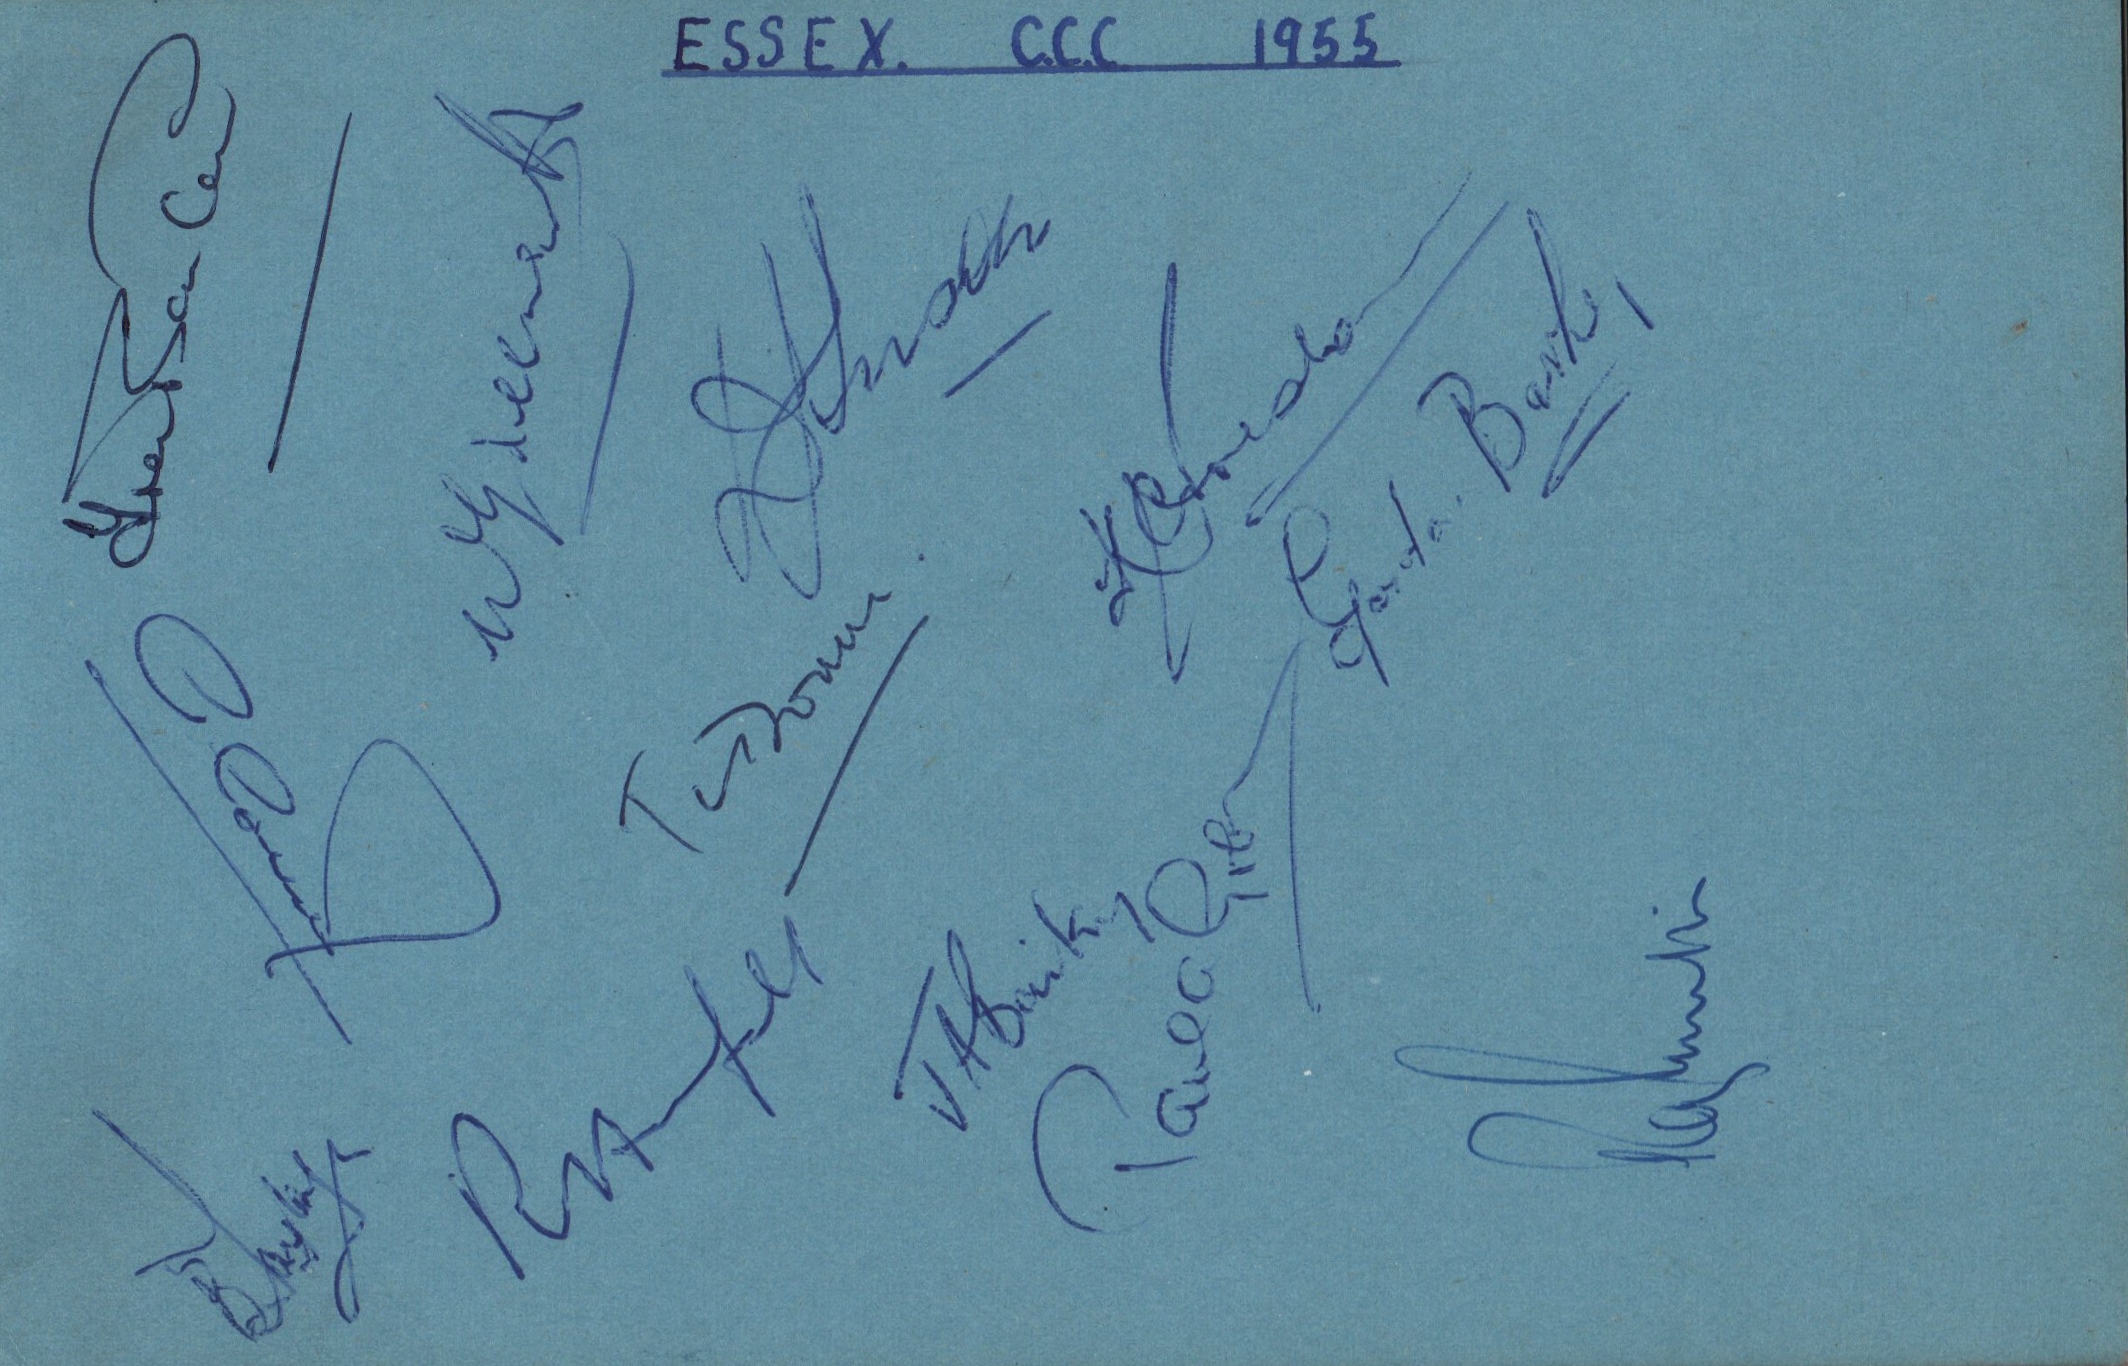 AUTOGRAPH ALBUM: An autograph album containing over 90 signatures by various cricket teams and - Image 3 of 16